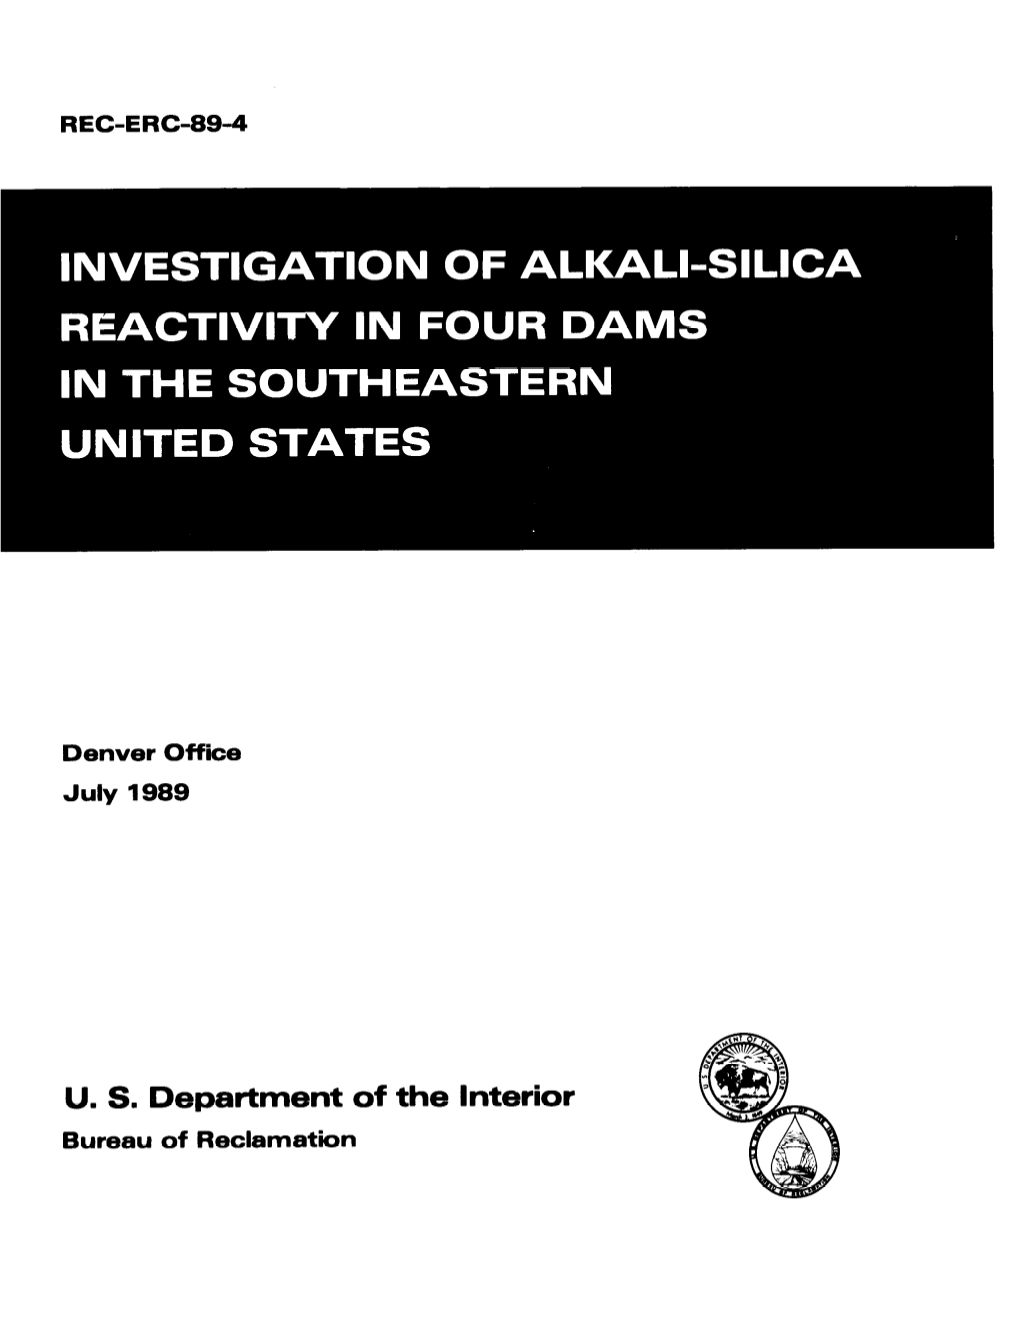 Investigation of Alkali-Silica Reactivity in Four Dams in the Southeastern United States